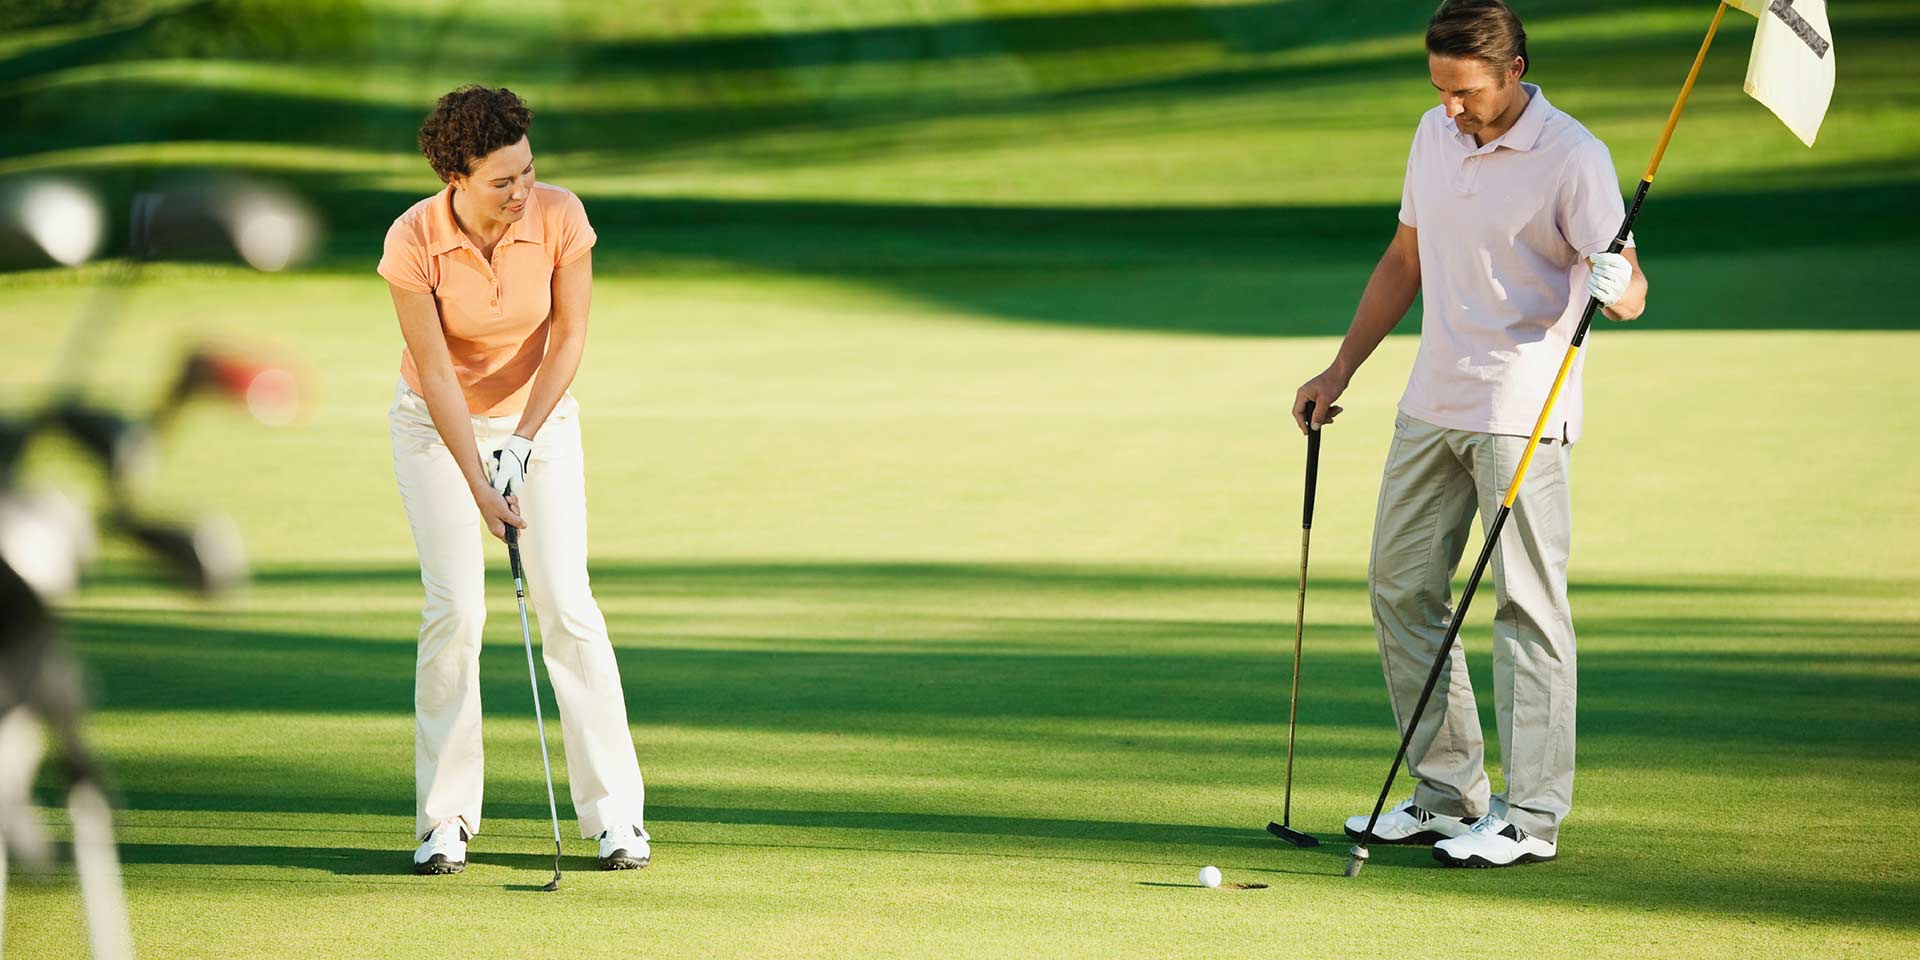 Find out more about the Member-Guest tournament at Golden Ocaia.